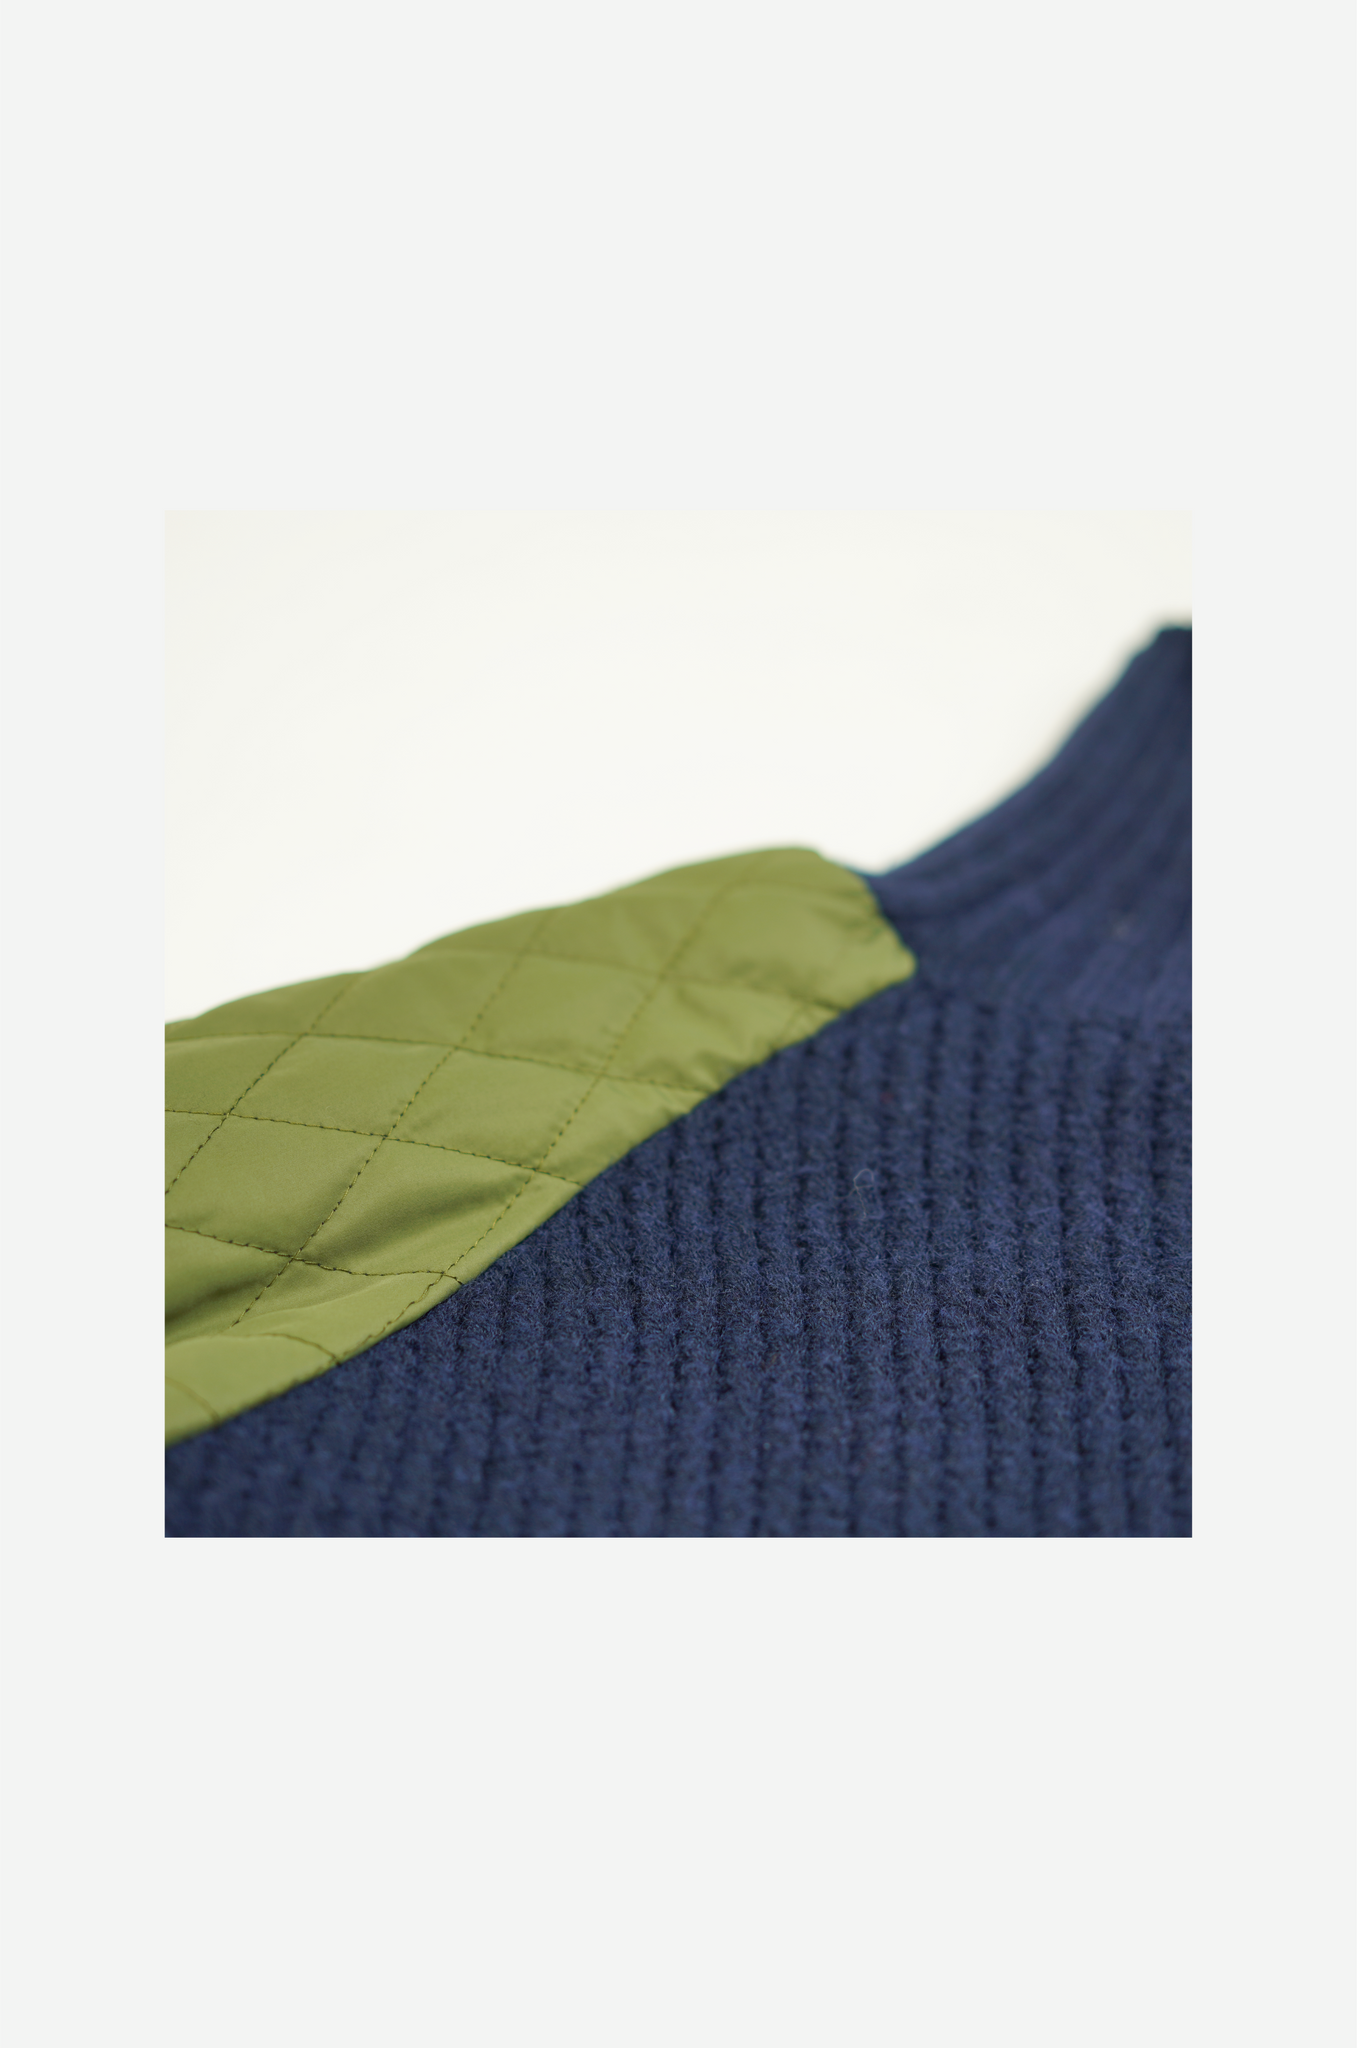 ・ Reserved items Quilted High-neck Knit